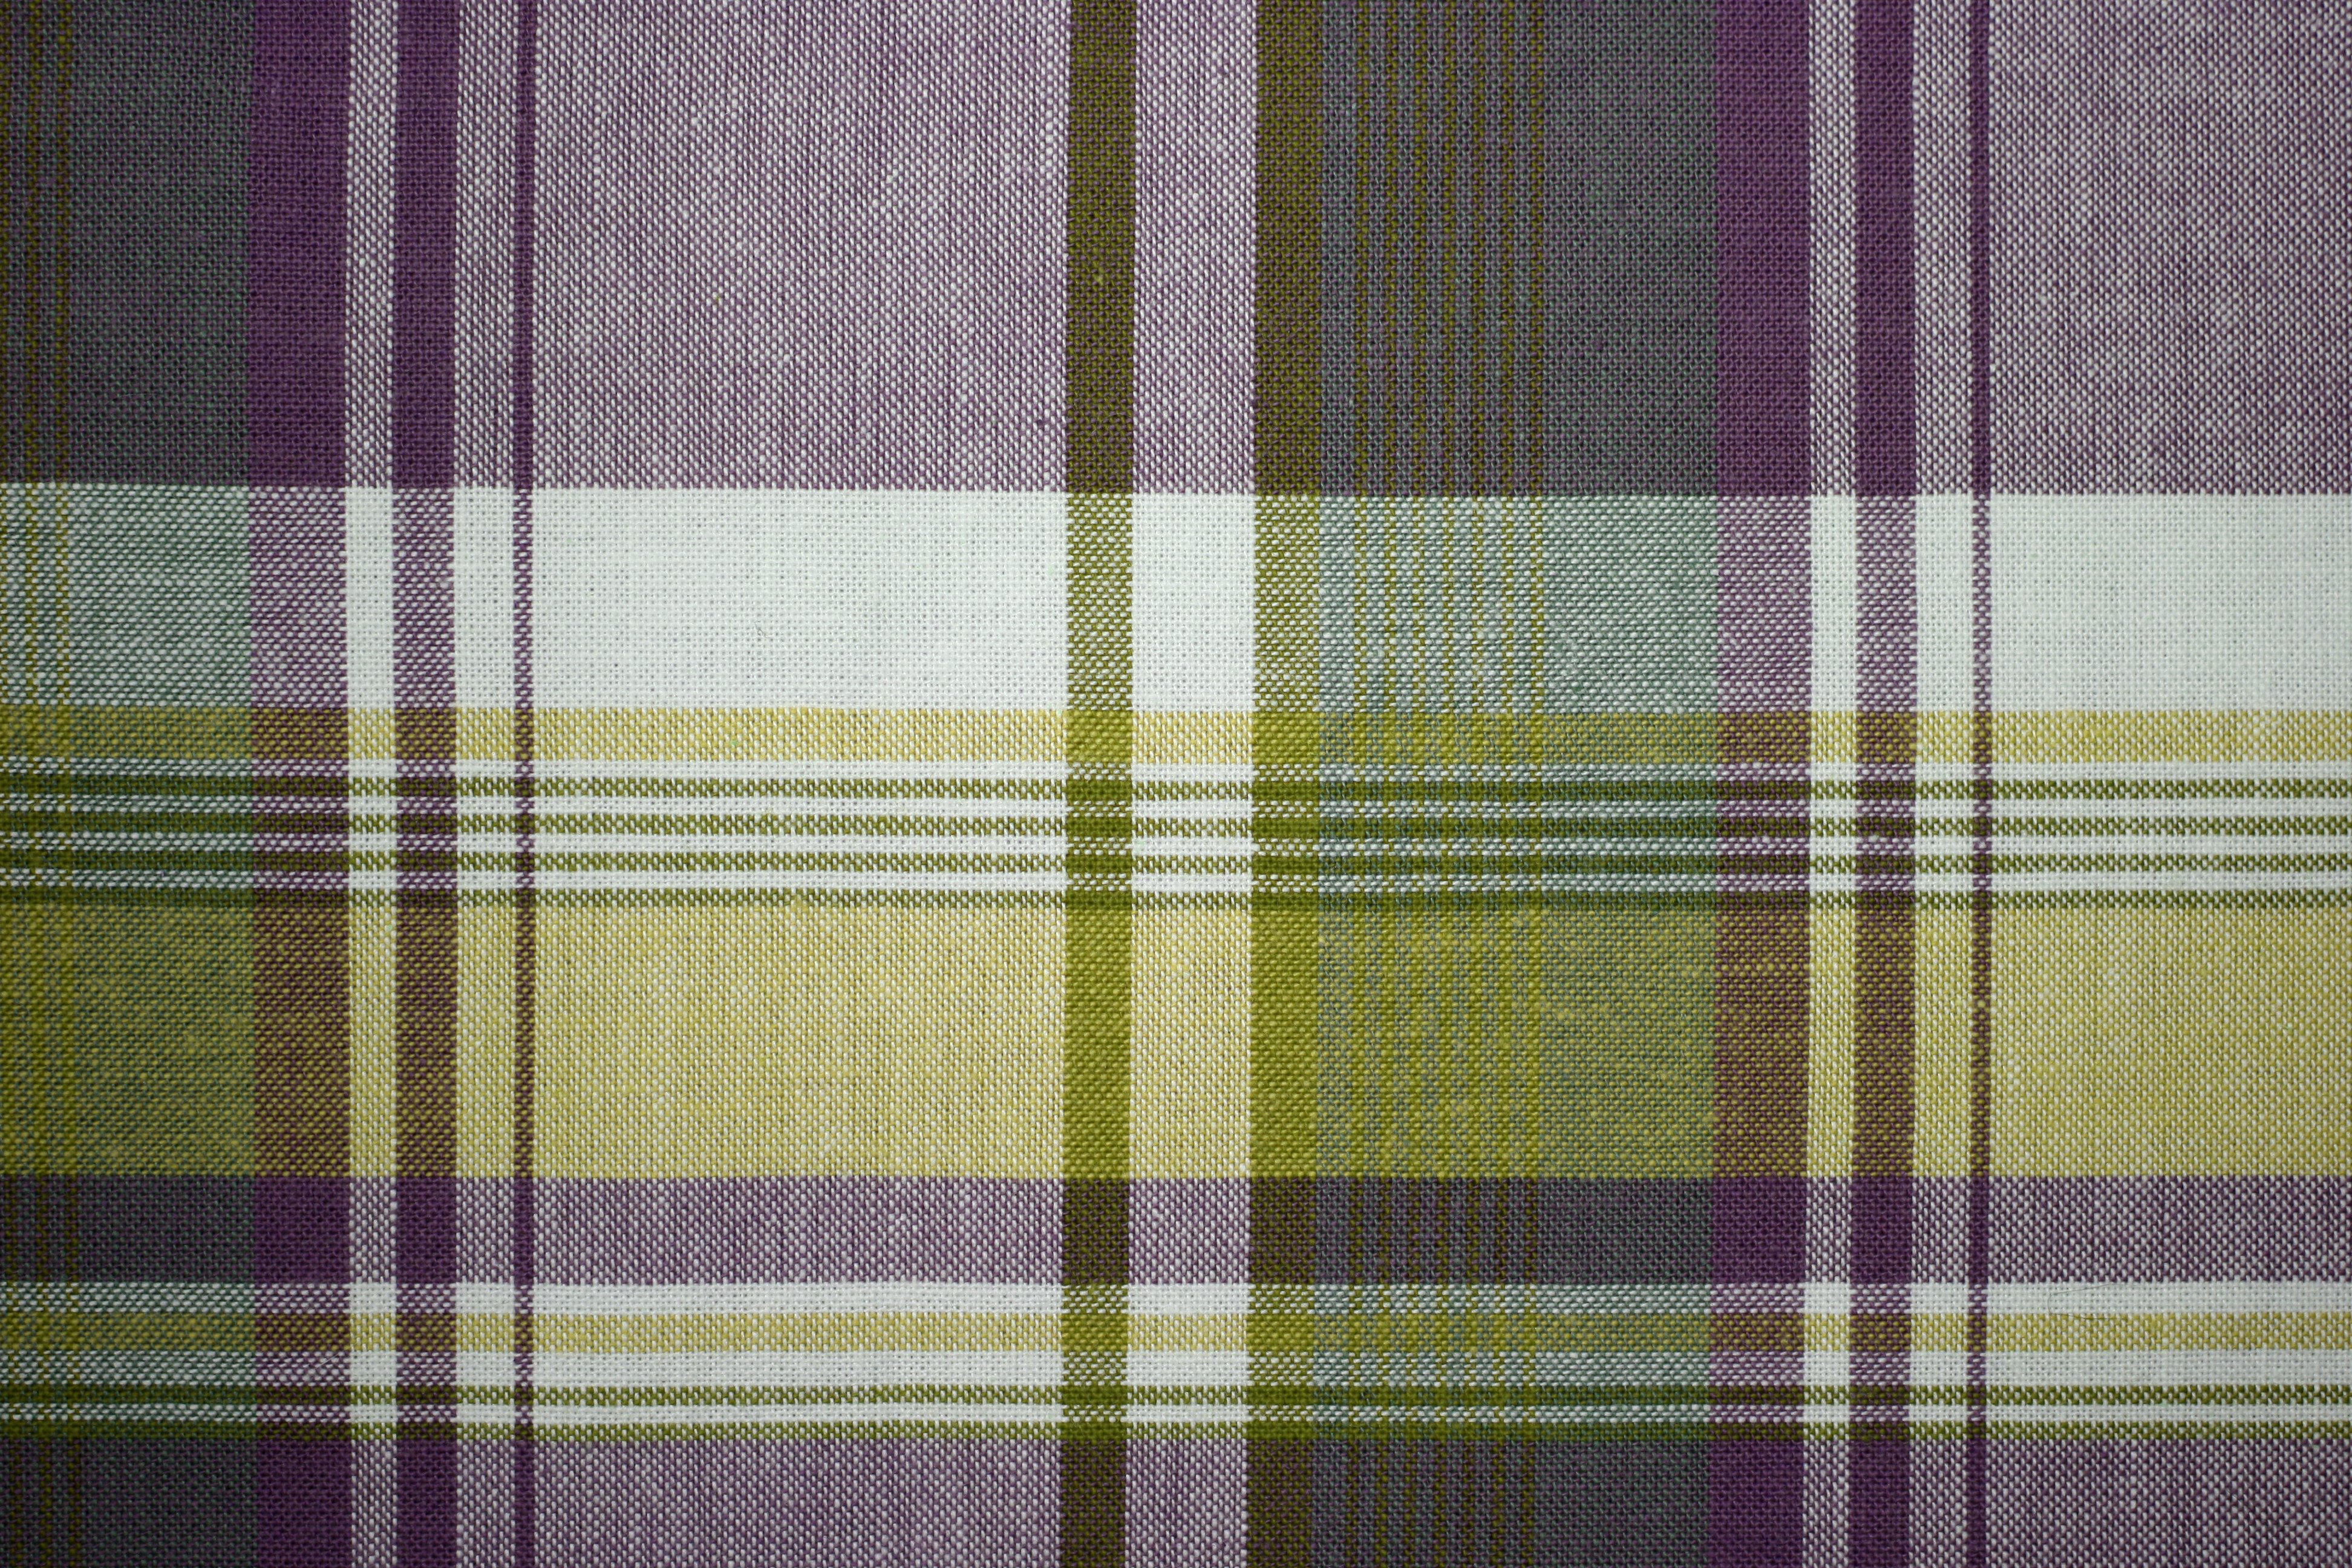 Plaid Fabric Texture Purple and Yellow   Free High Resolution Photo